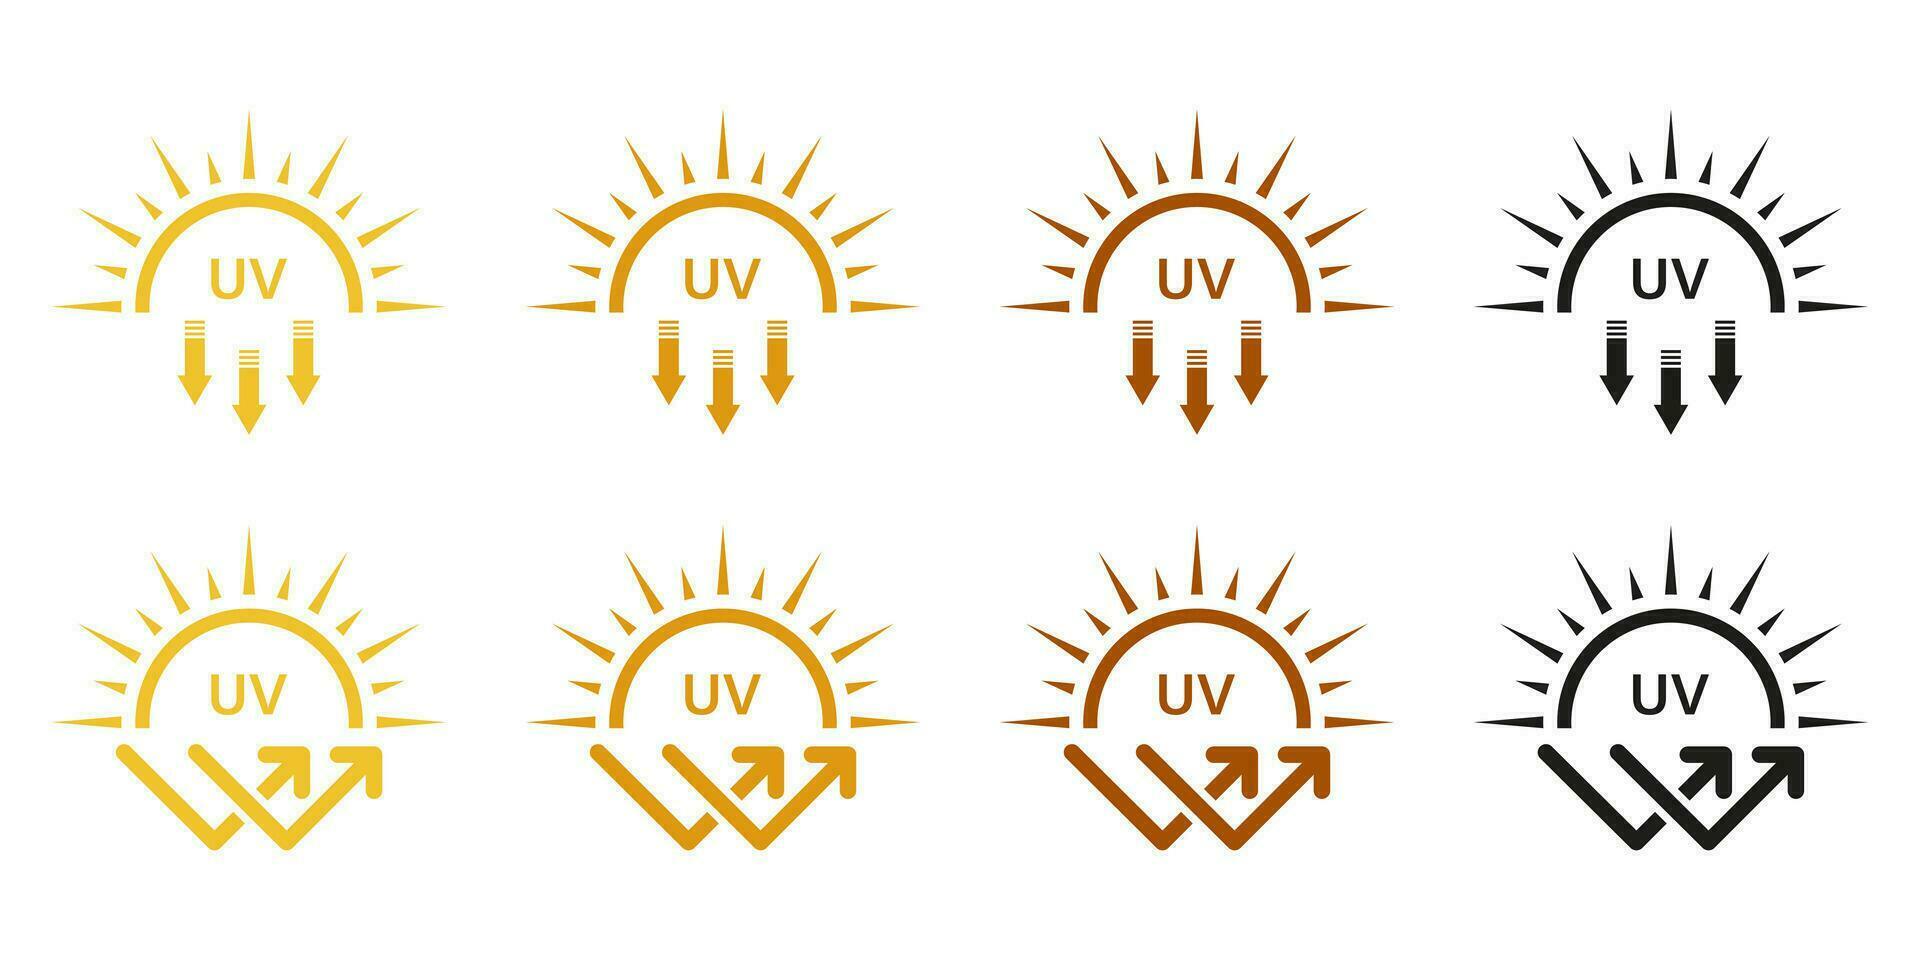 SPF Protection, Sunscreen Lotion Icon Set. Sunblock Cream Label. Skin Protect, Danger UV Sunlight Pictogram. Block Solar Radiation and Ultraviolet Rays Symbol Collection. Isolated Vector Illustration.